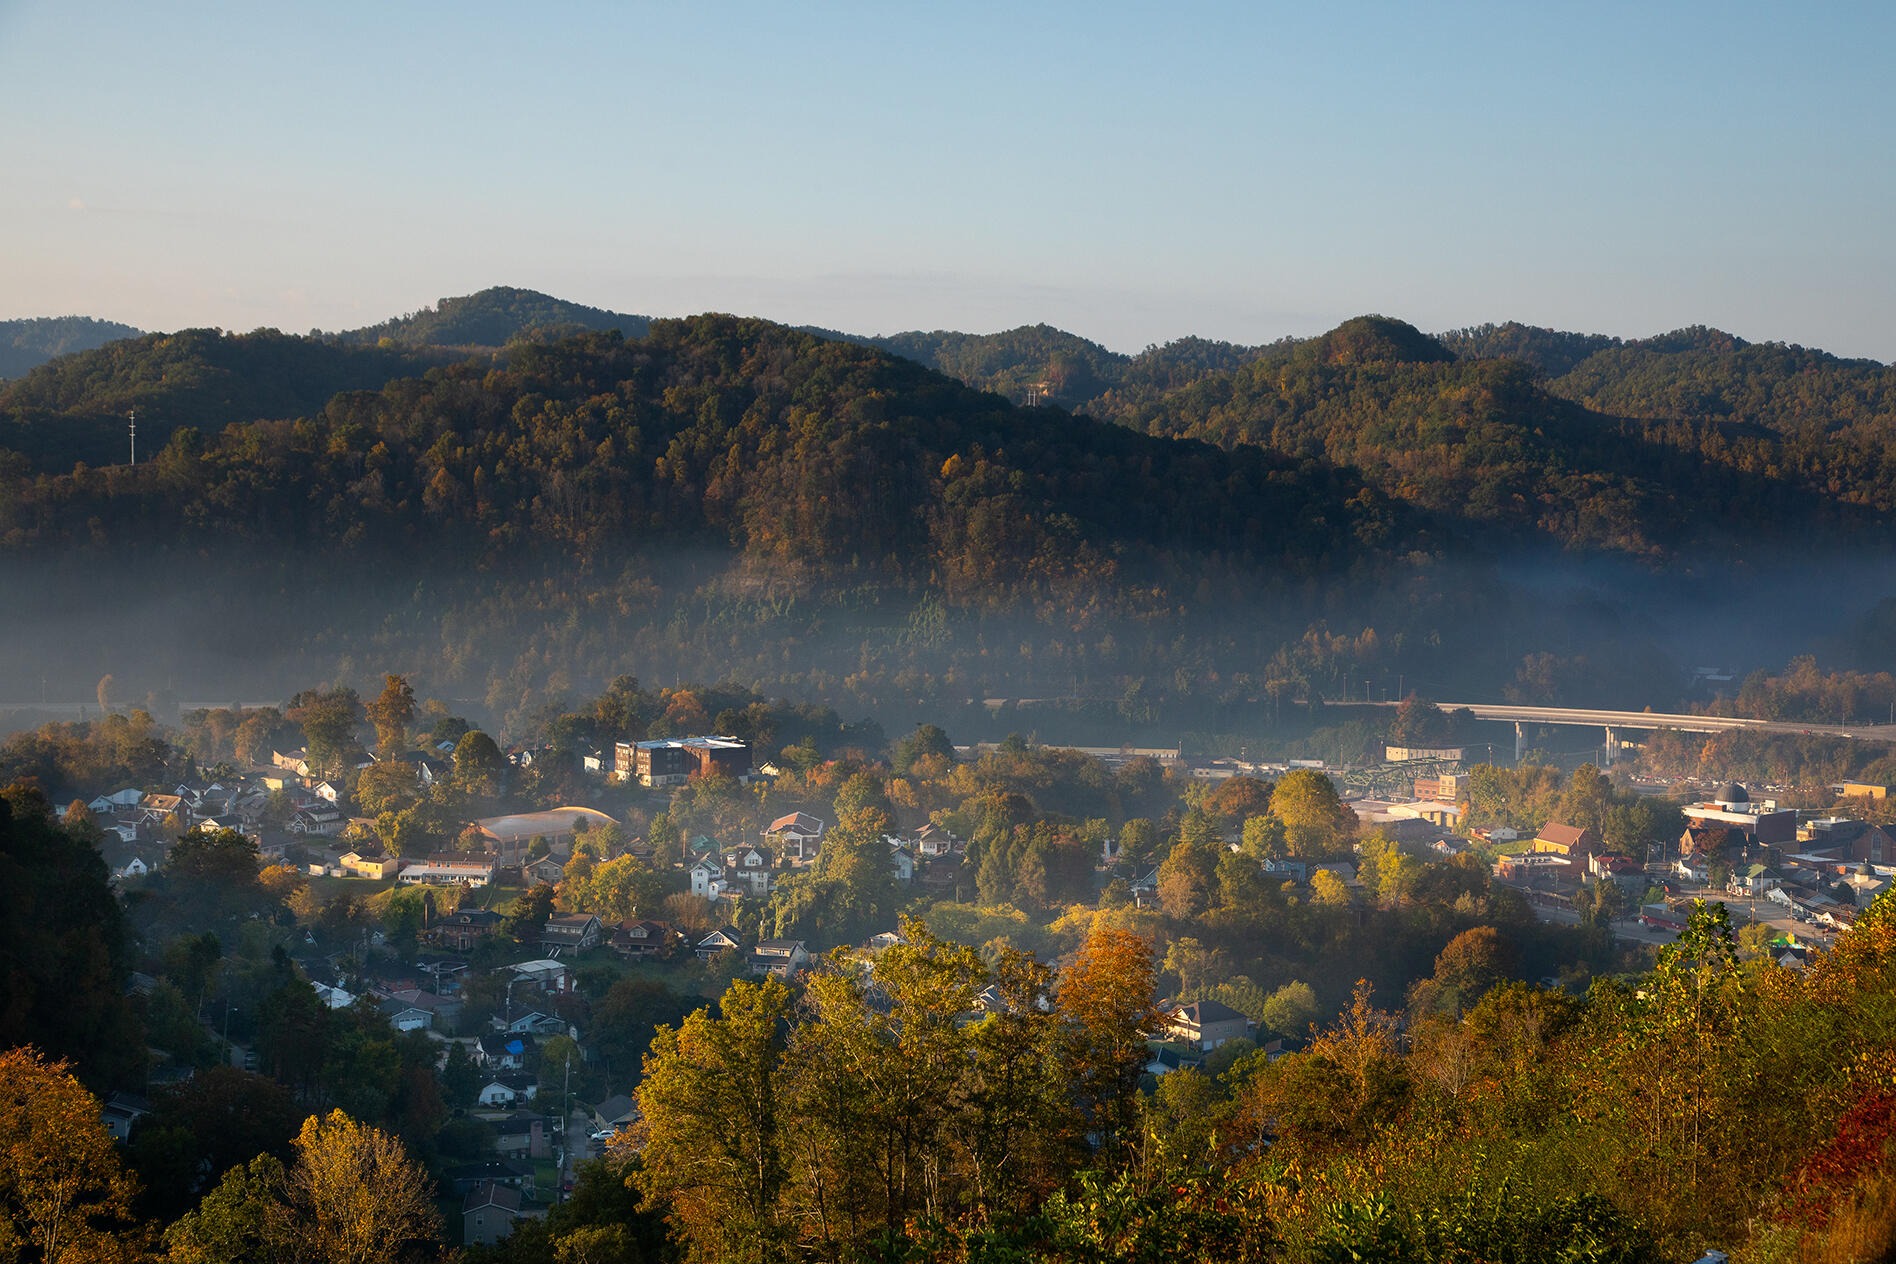 The Appalachian Mountains surround Perry County, Kentucky.